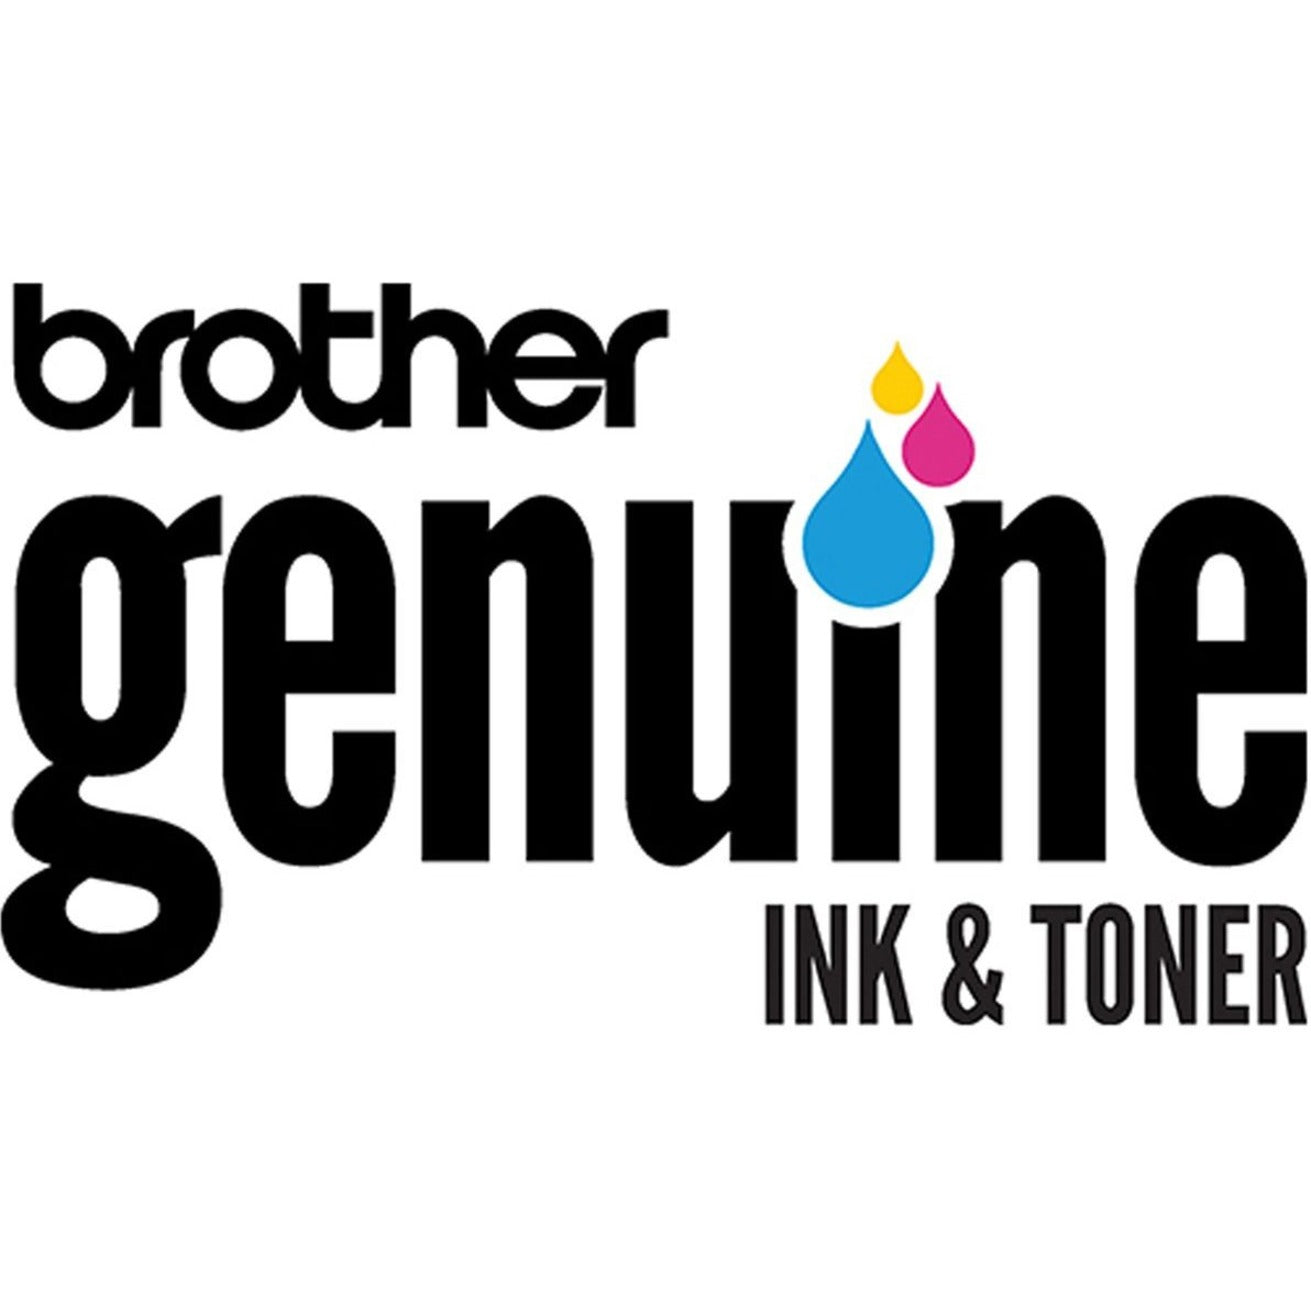 Brother LC406XLMS LC406XLM INKvestment Tank Ink Cartridge, High Yield, Magenta